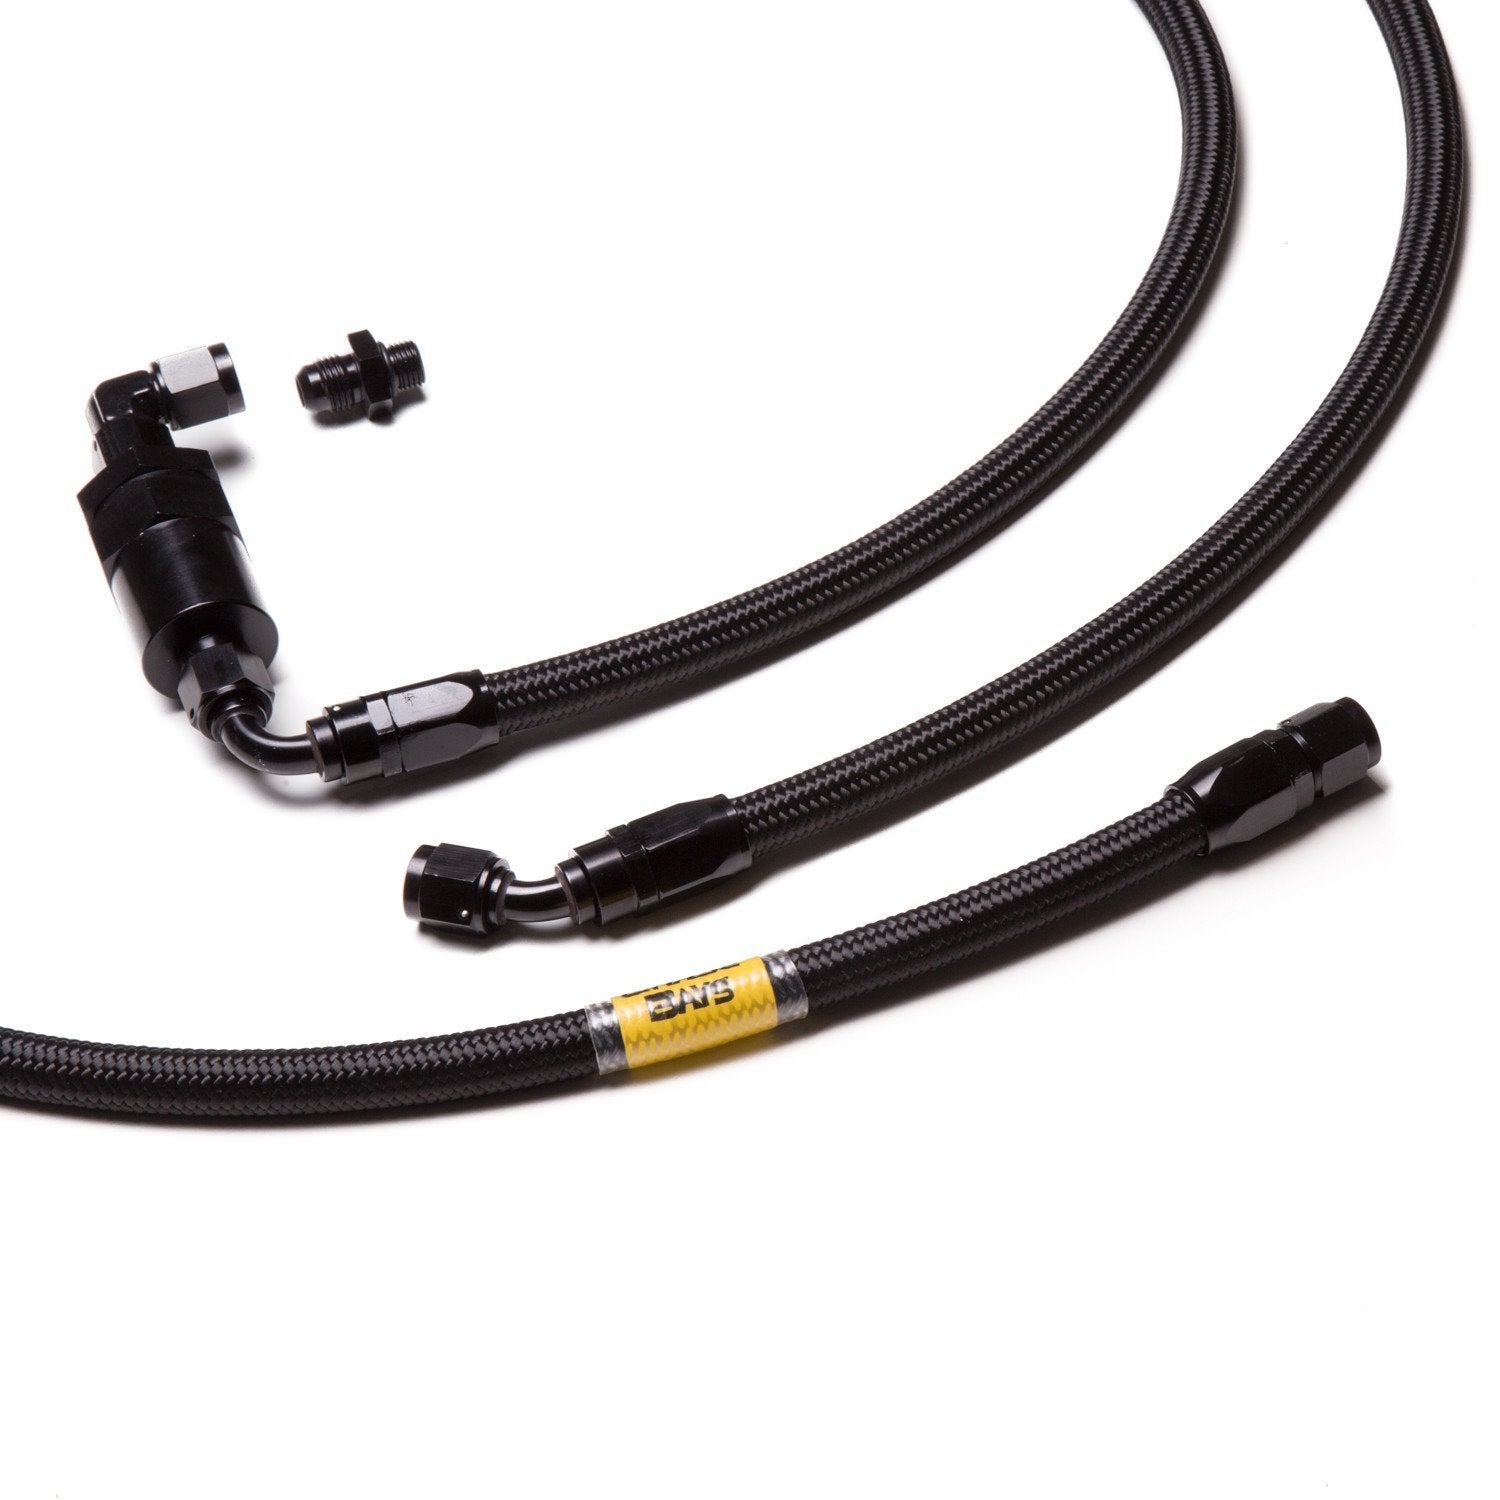 CHASE BAYS Nissan Silvia S13 S14 S15 Fuel Line Kit with Toytoa 1JZ 2JZ Swap - PARTS33 GmbH